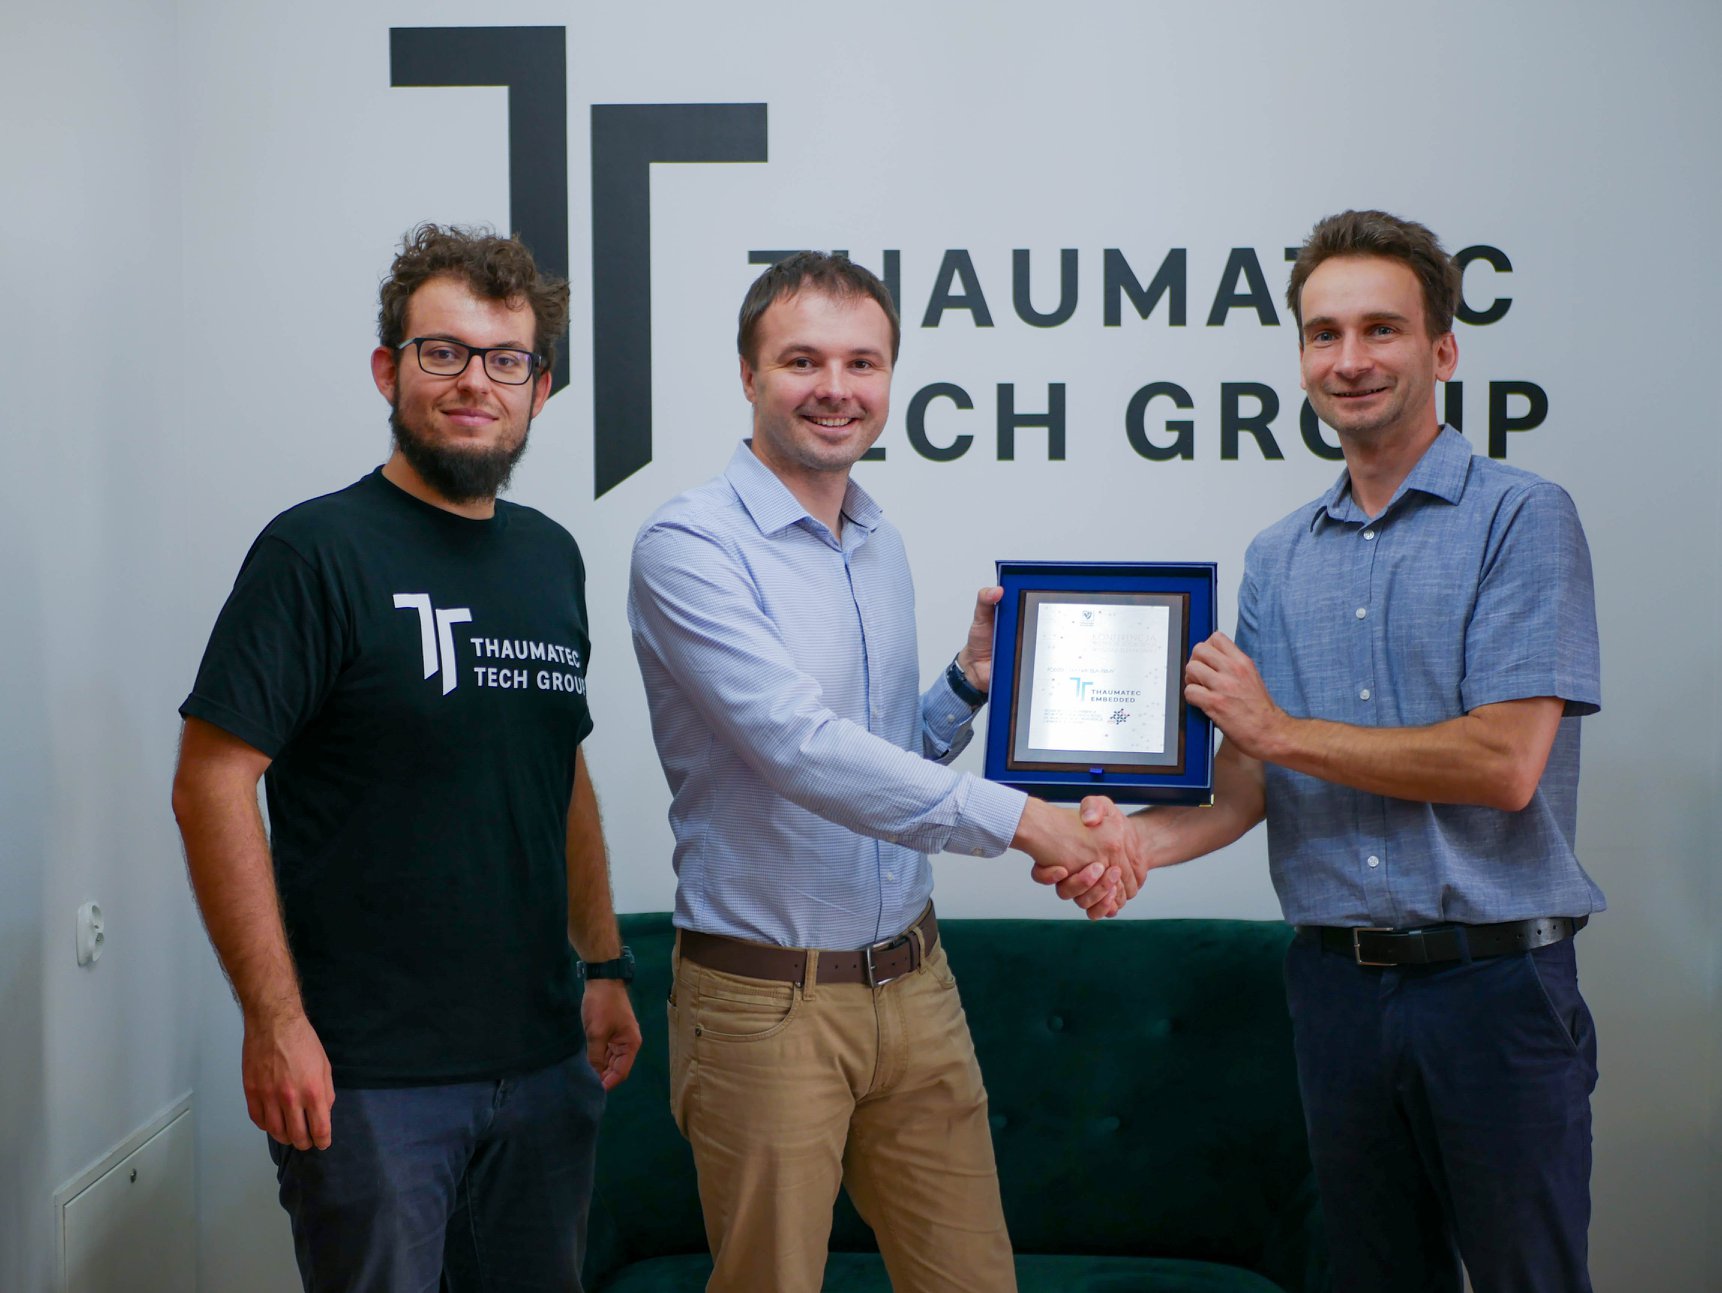 Another Team Projects Conference diploma for Thaumatec